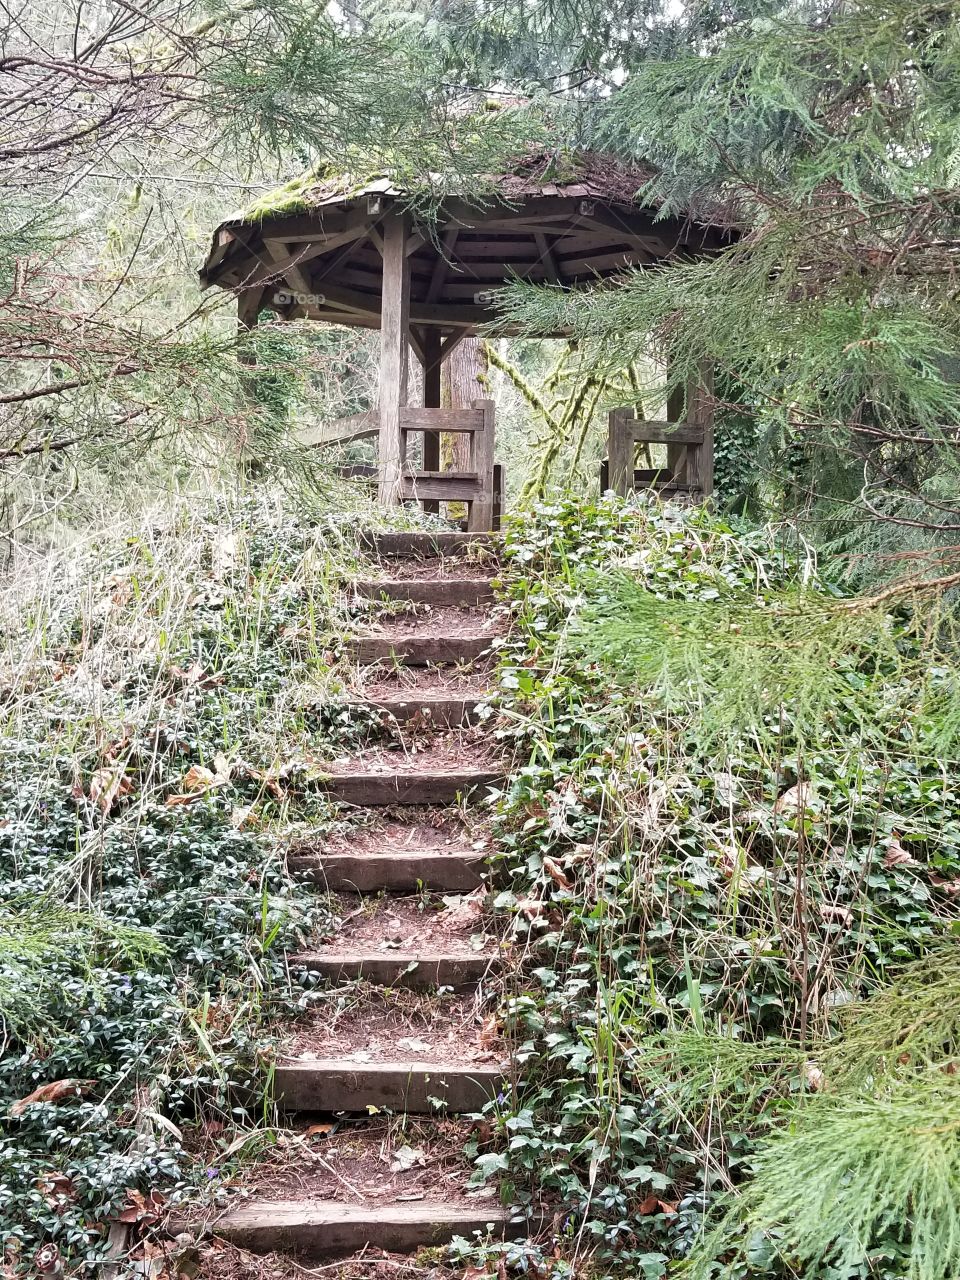 old wooden stairs leading the an old gazebo in the forest near Seattle,WA in the early spring time